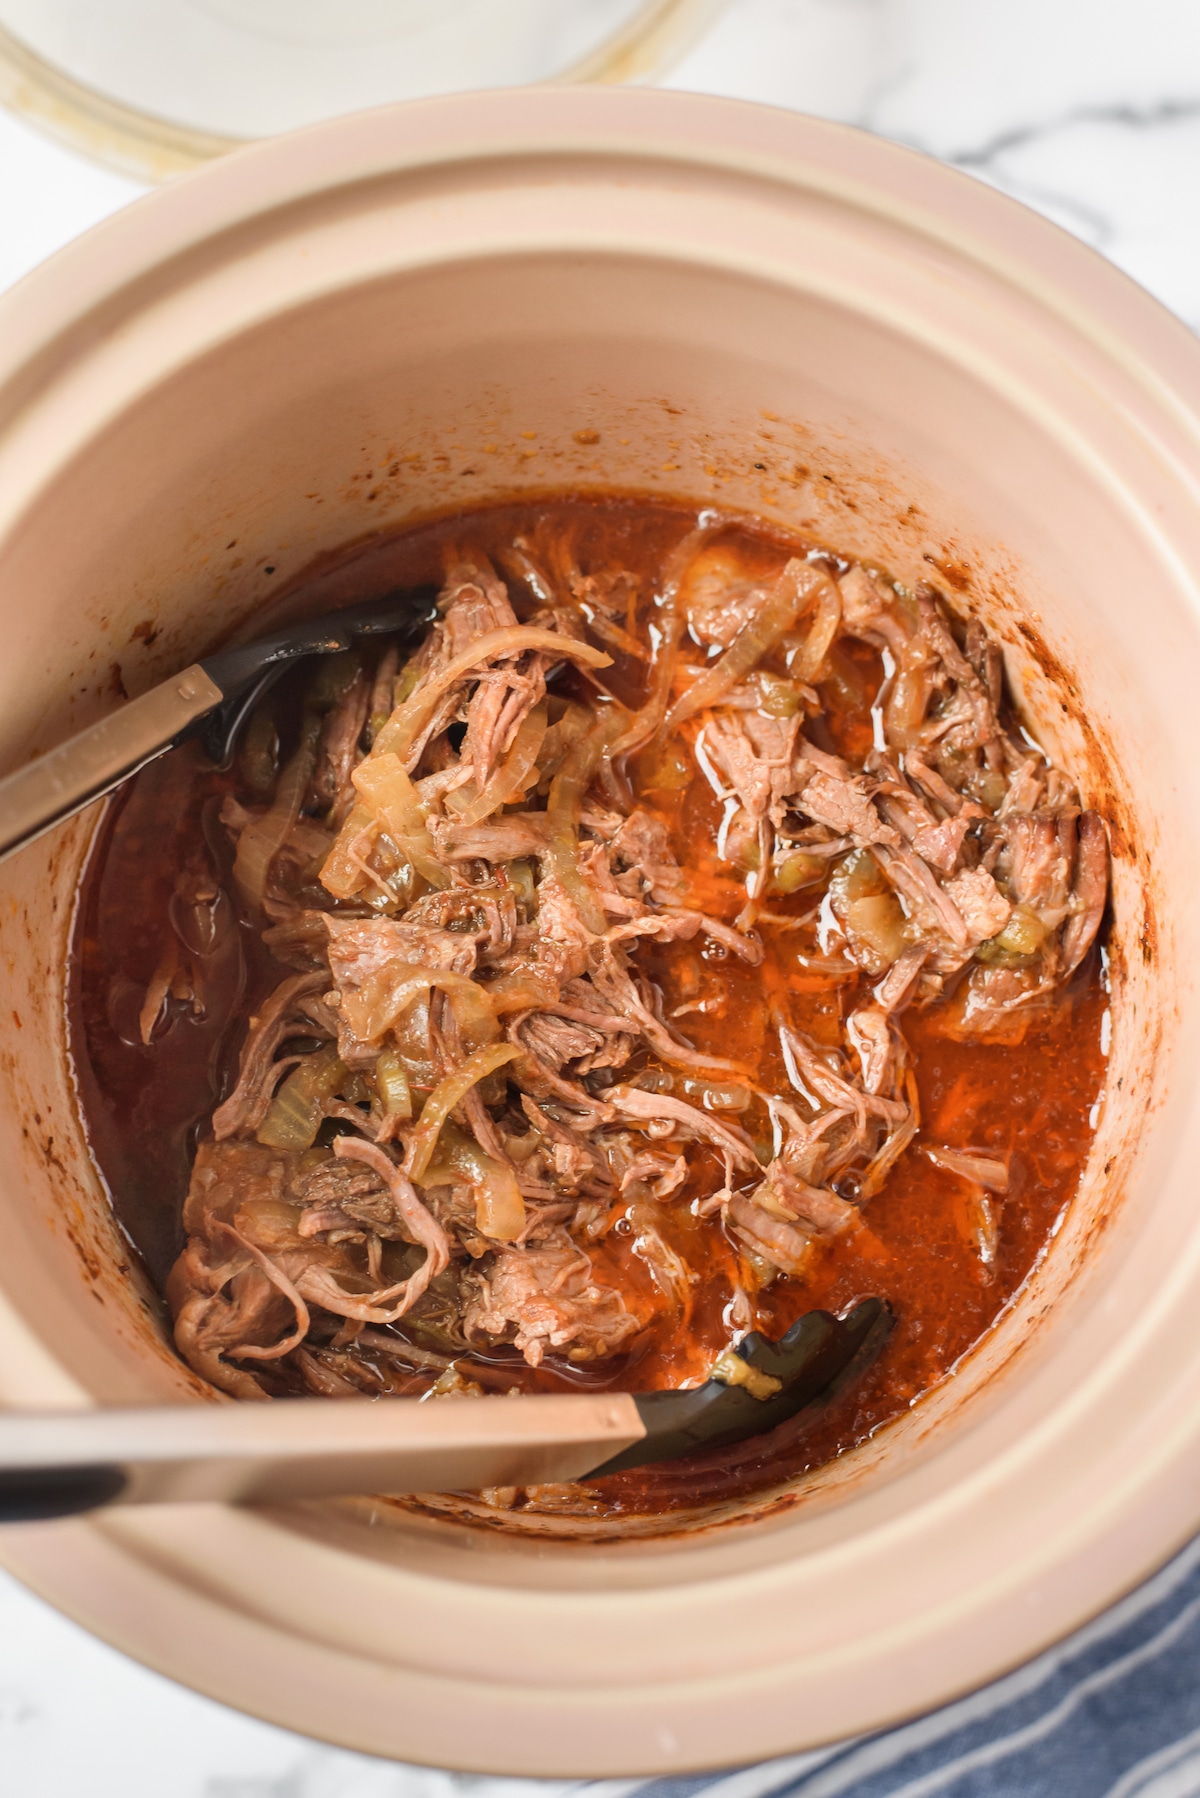 shredded chicken in a slow cooker.